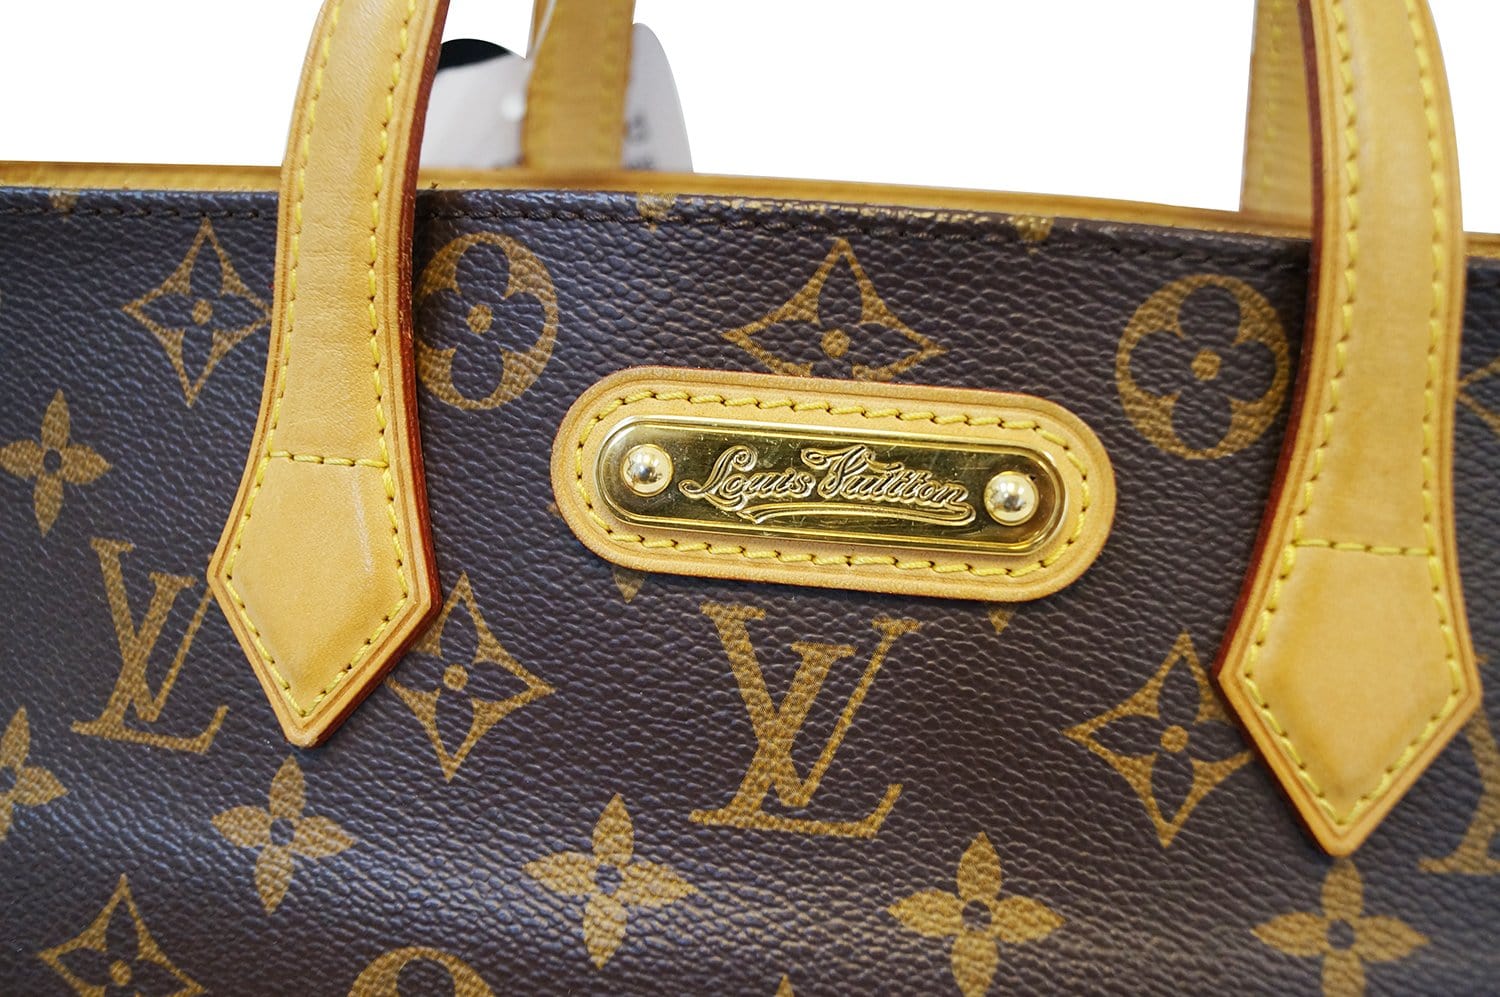 Louis Vuitton Wilshire Brown Gold Plated Handbag (Pre-Owned)